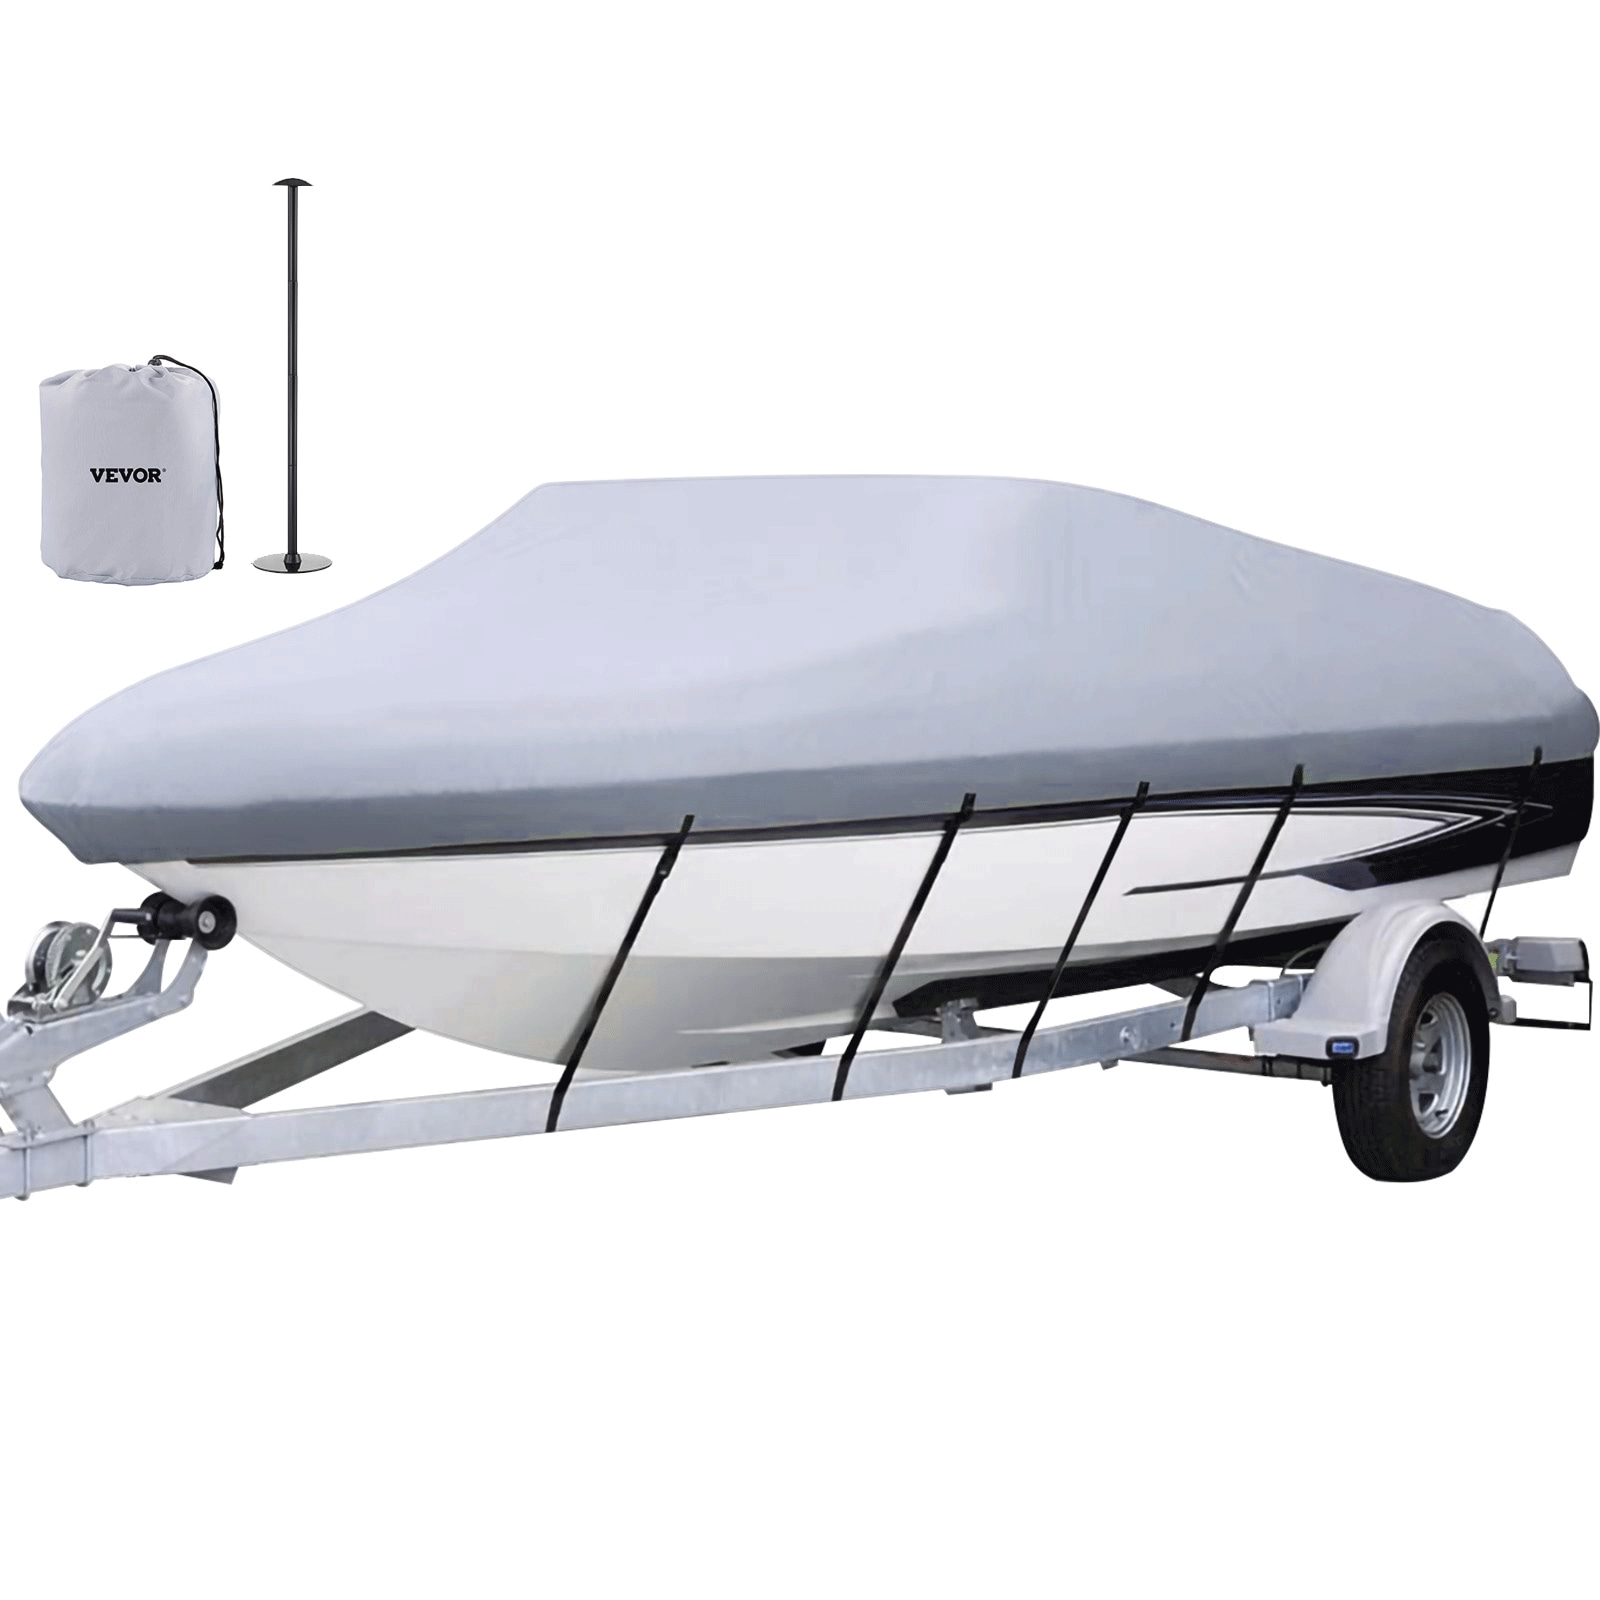 Wholesale aluminium boats accessories For Your Marine Activities